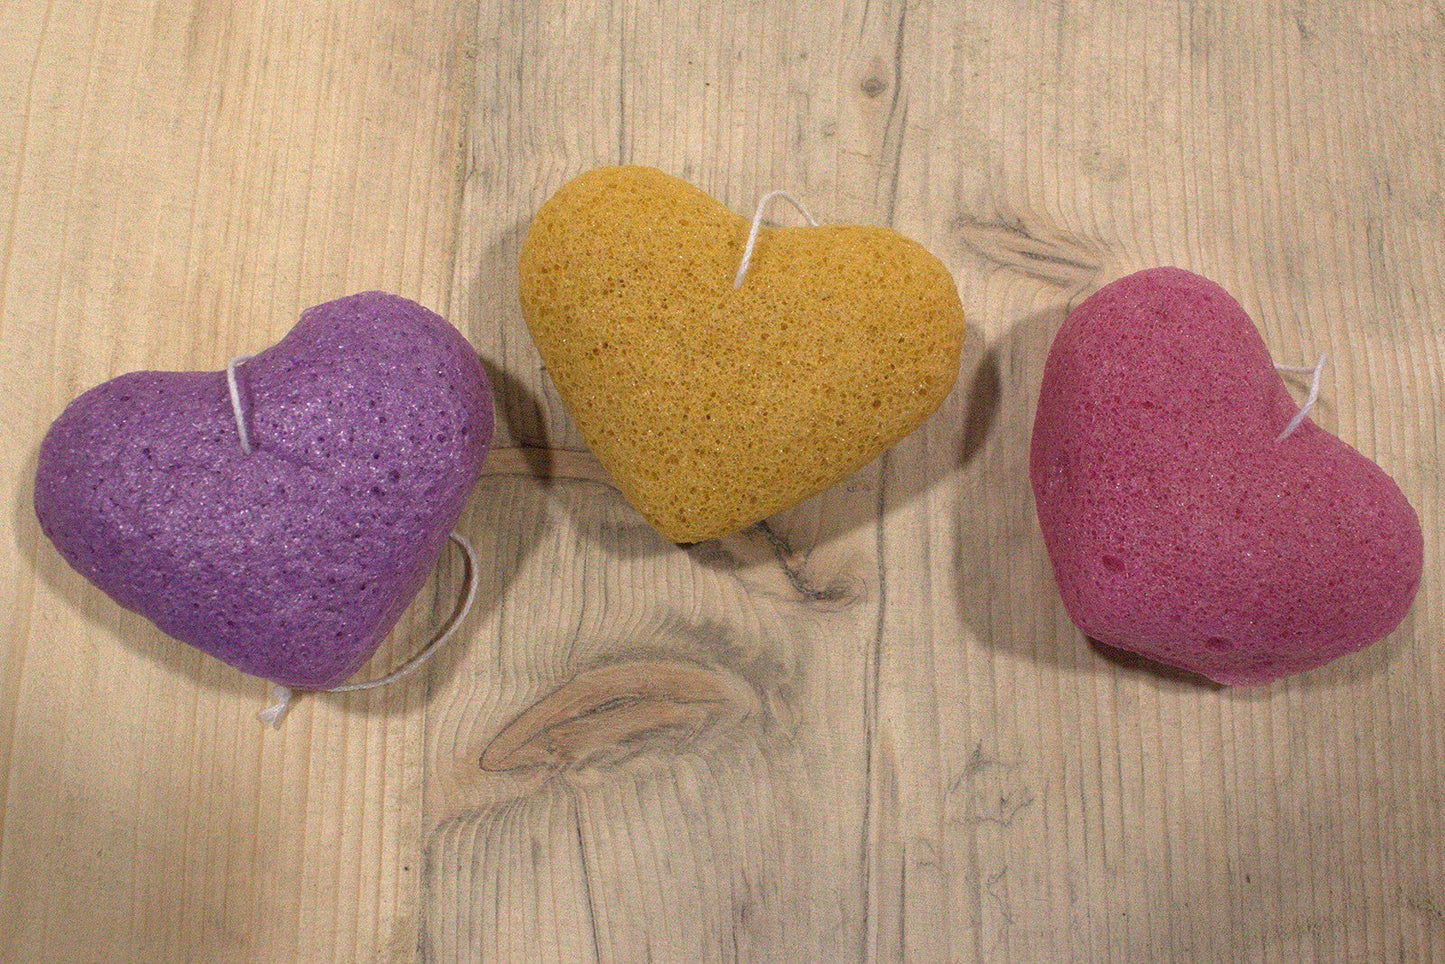 Japanese Konjac Sponge Japanese Konjac Sponges Soul Inspired Mixed Pack of 3 Heart 